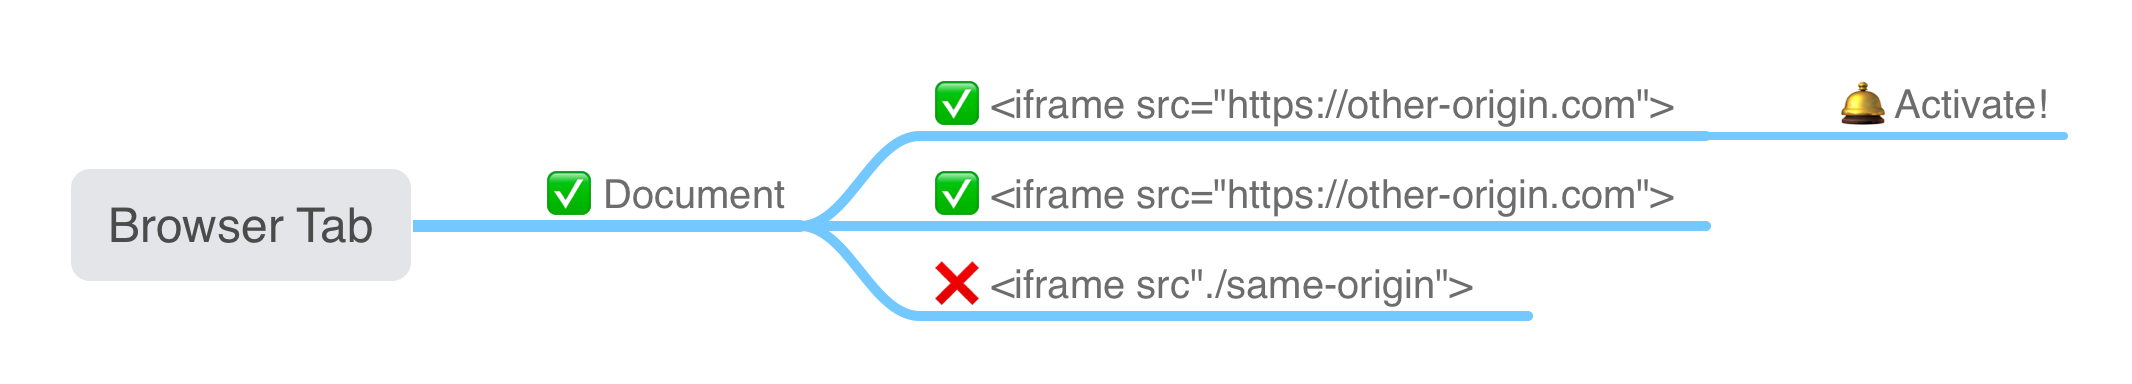 Activation propagating to parent frame, to other iframes that match the third-party iframe